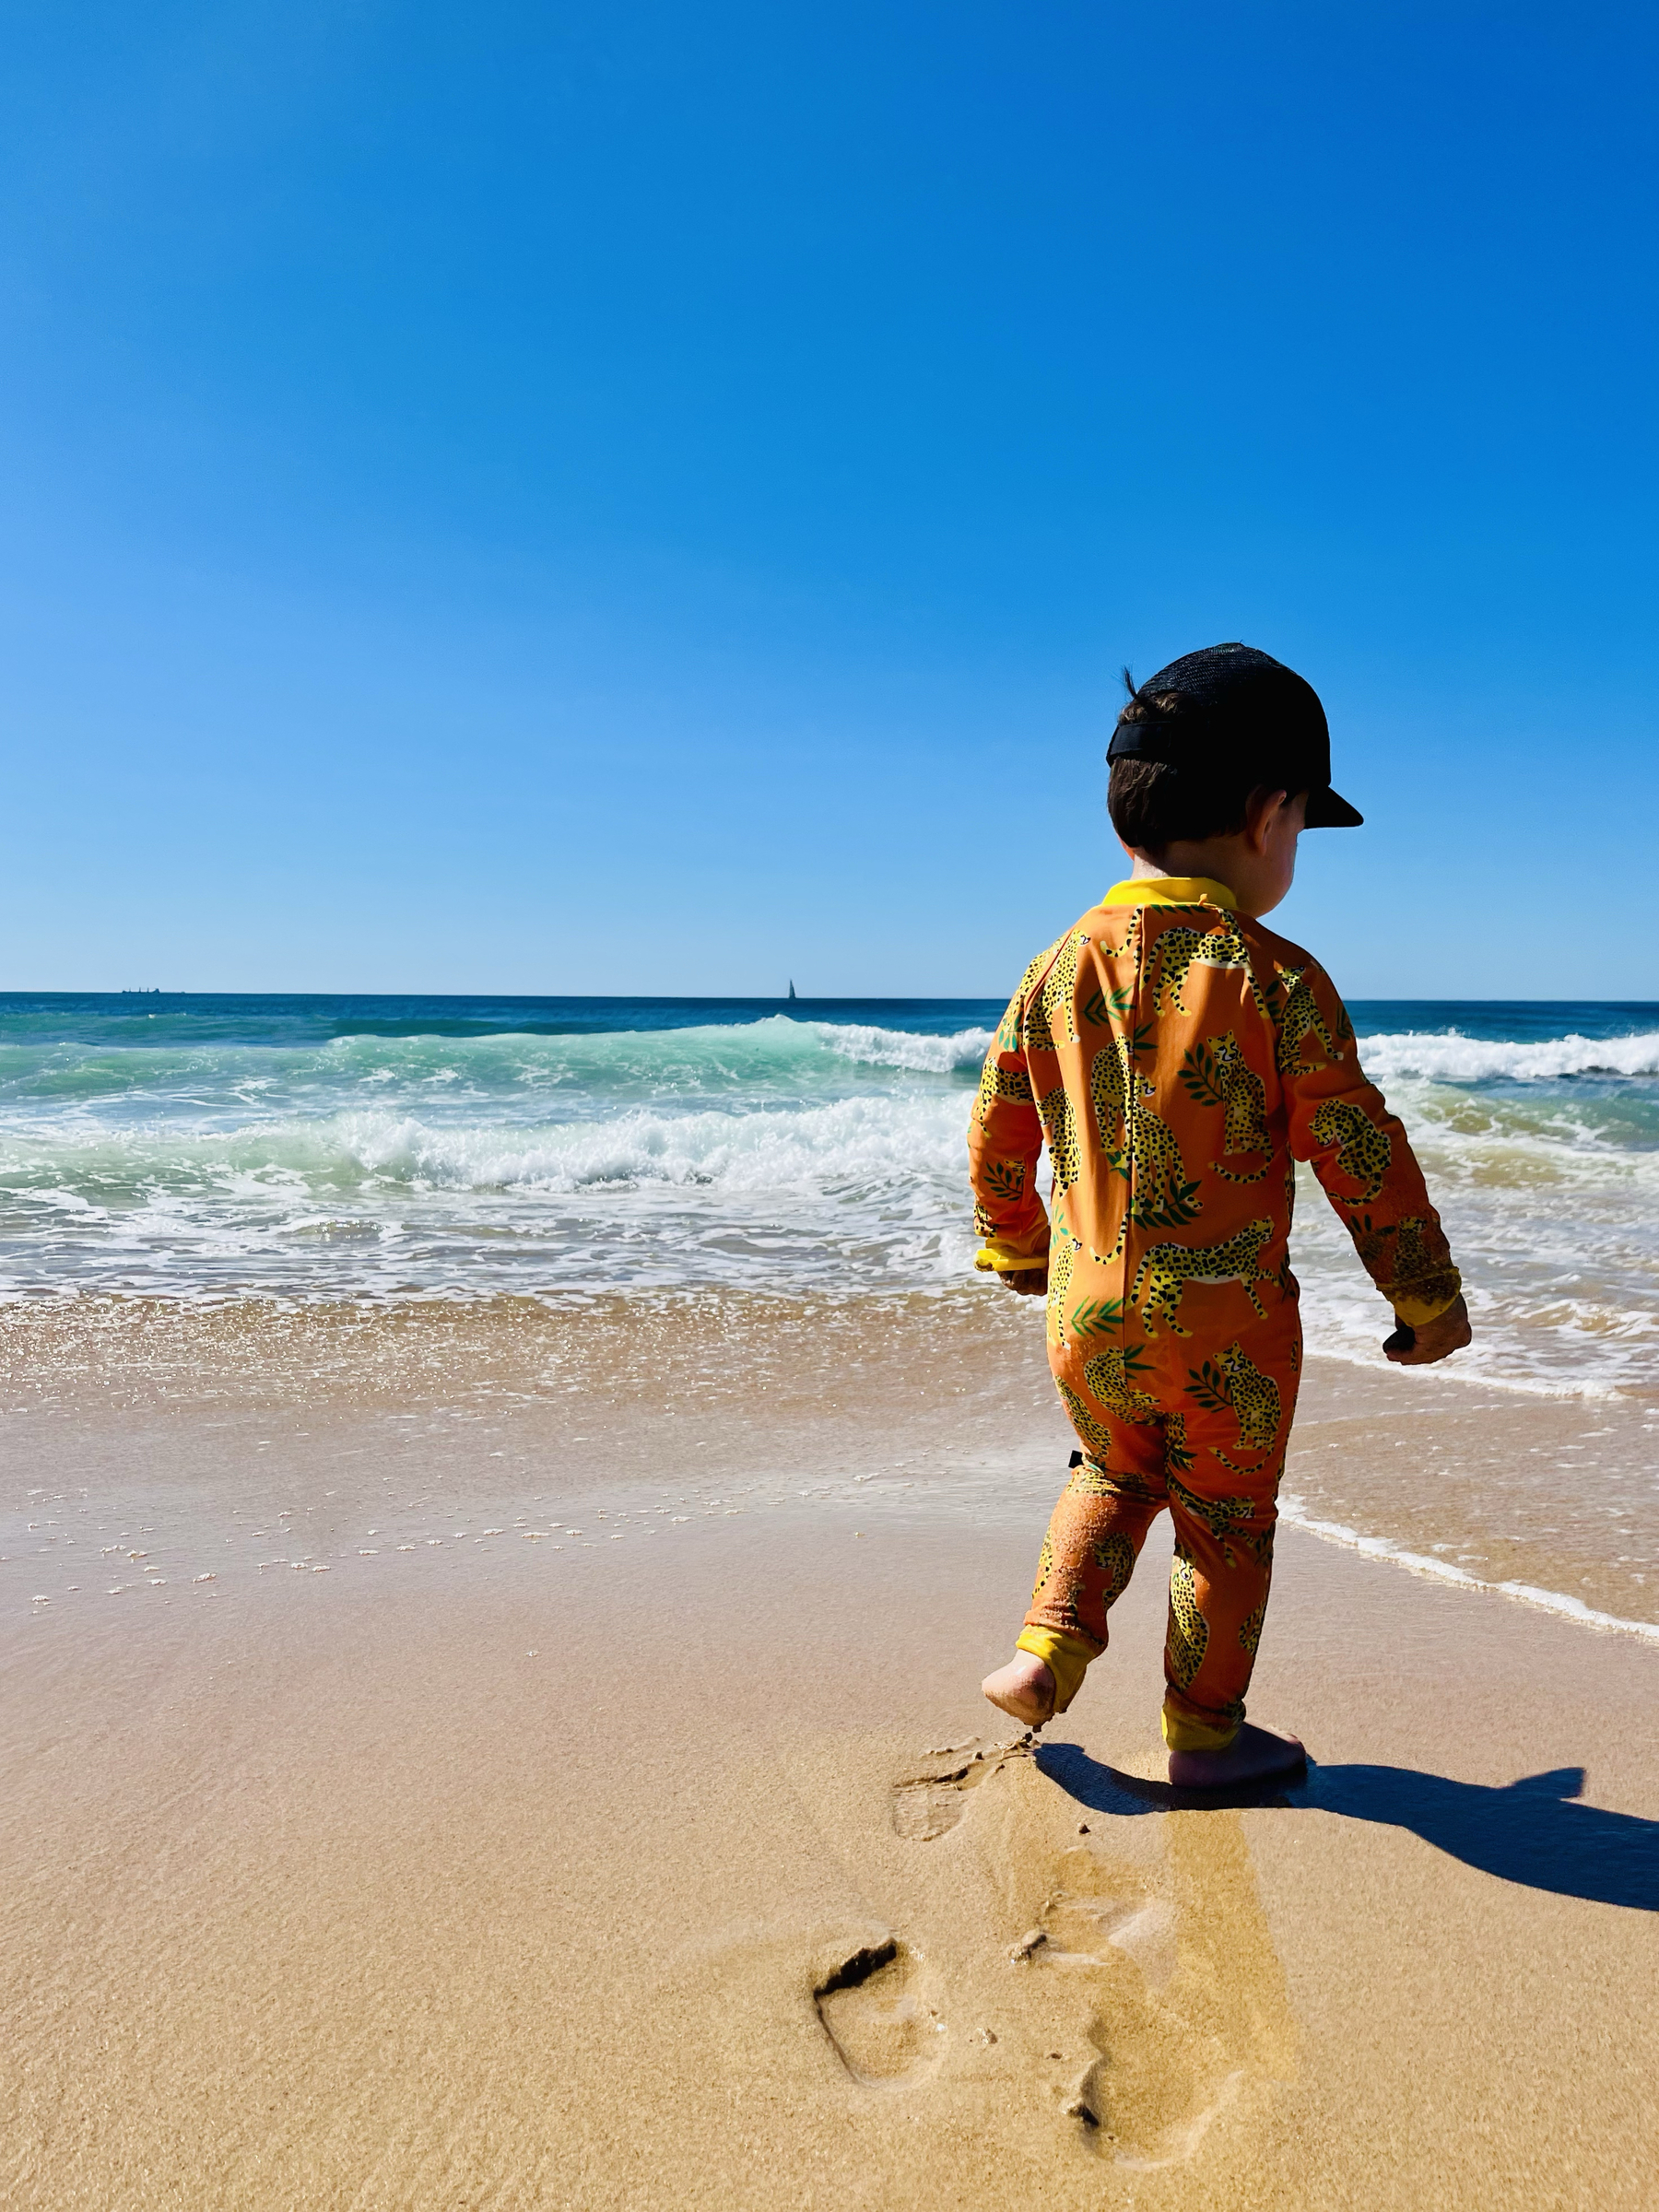 A toddler stands on sand in front of waves, under a cloudless sky.